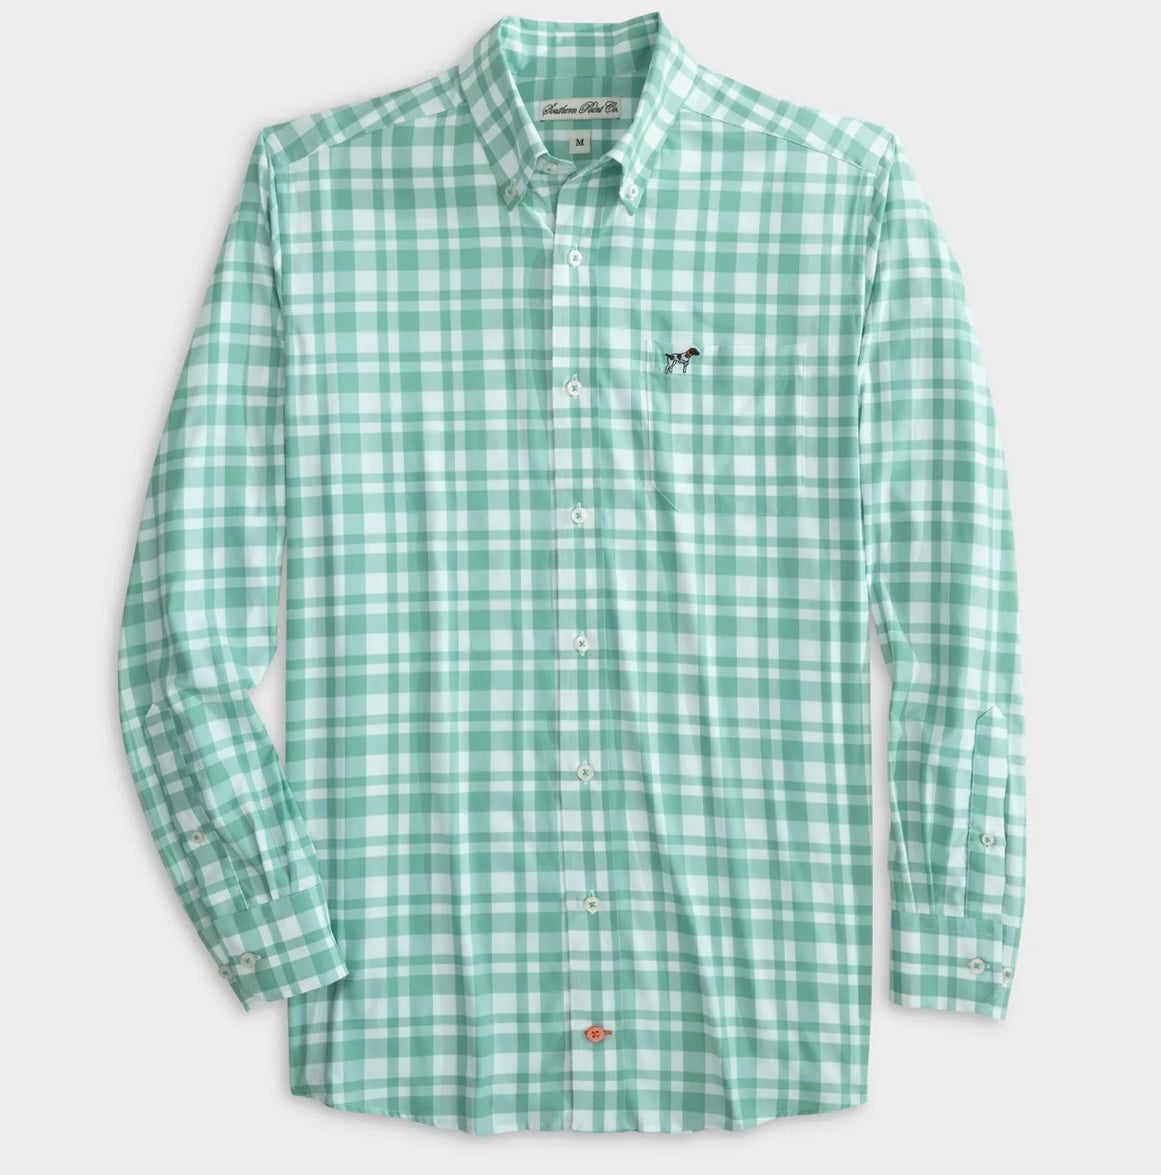 Hadley Performance YOUTH Button Down in Bermuda Plaid by Southern Point Co.